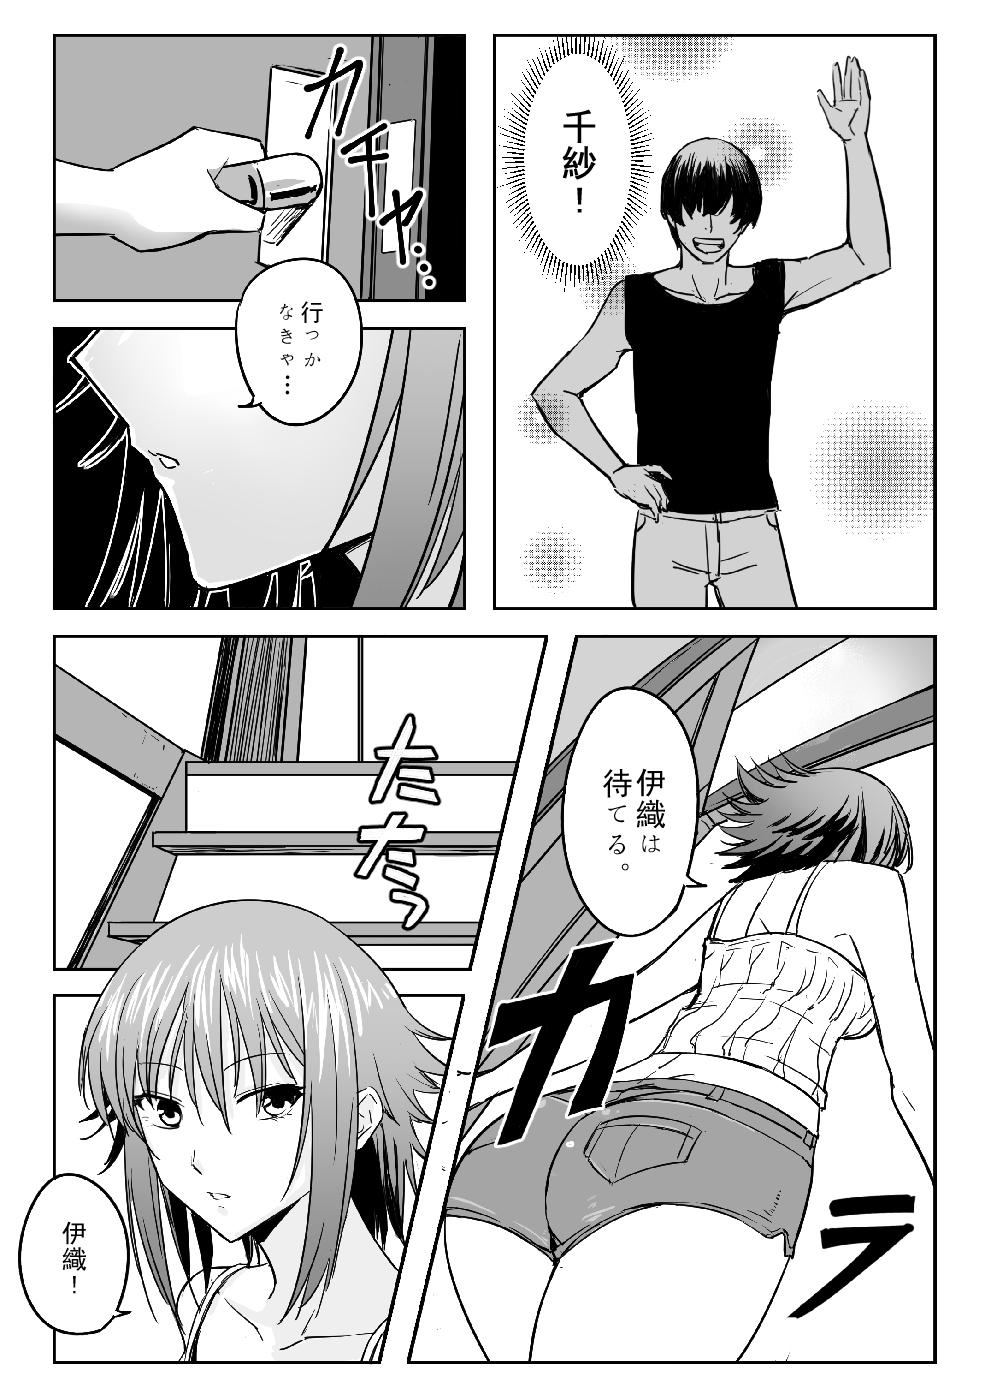 Missionary Chika-chan is a goodbye! - Grand blue Webcamshow - Page 5